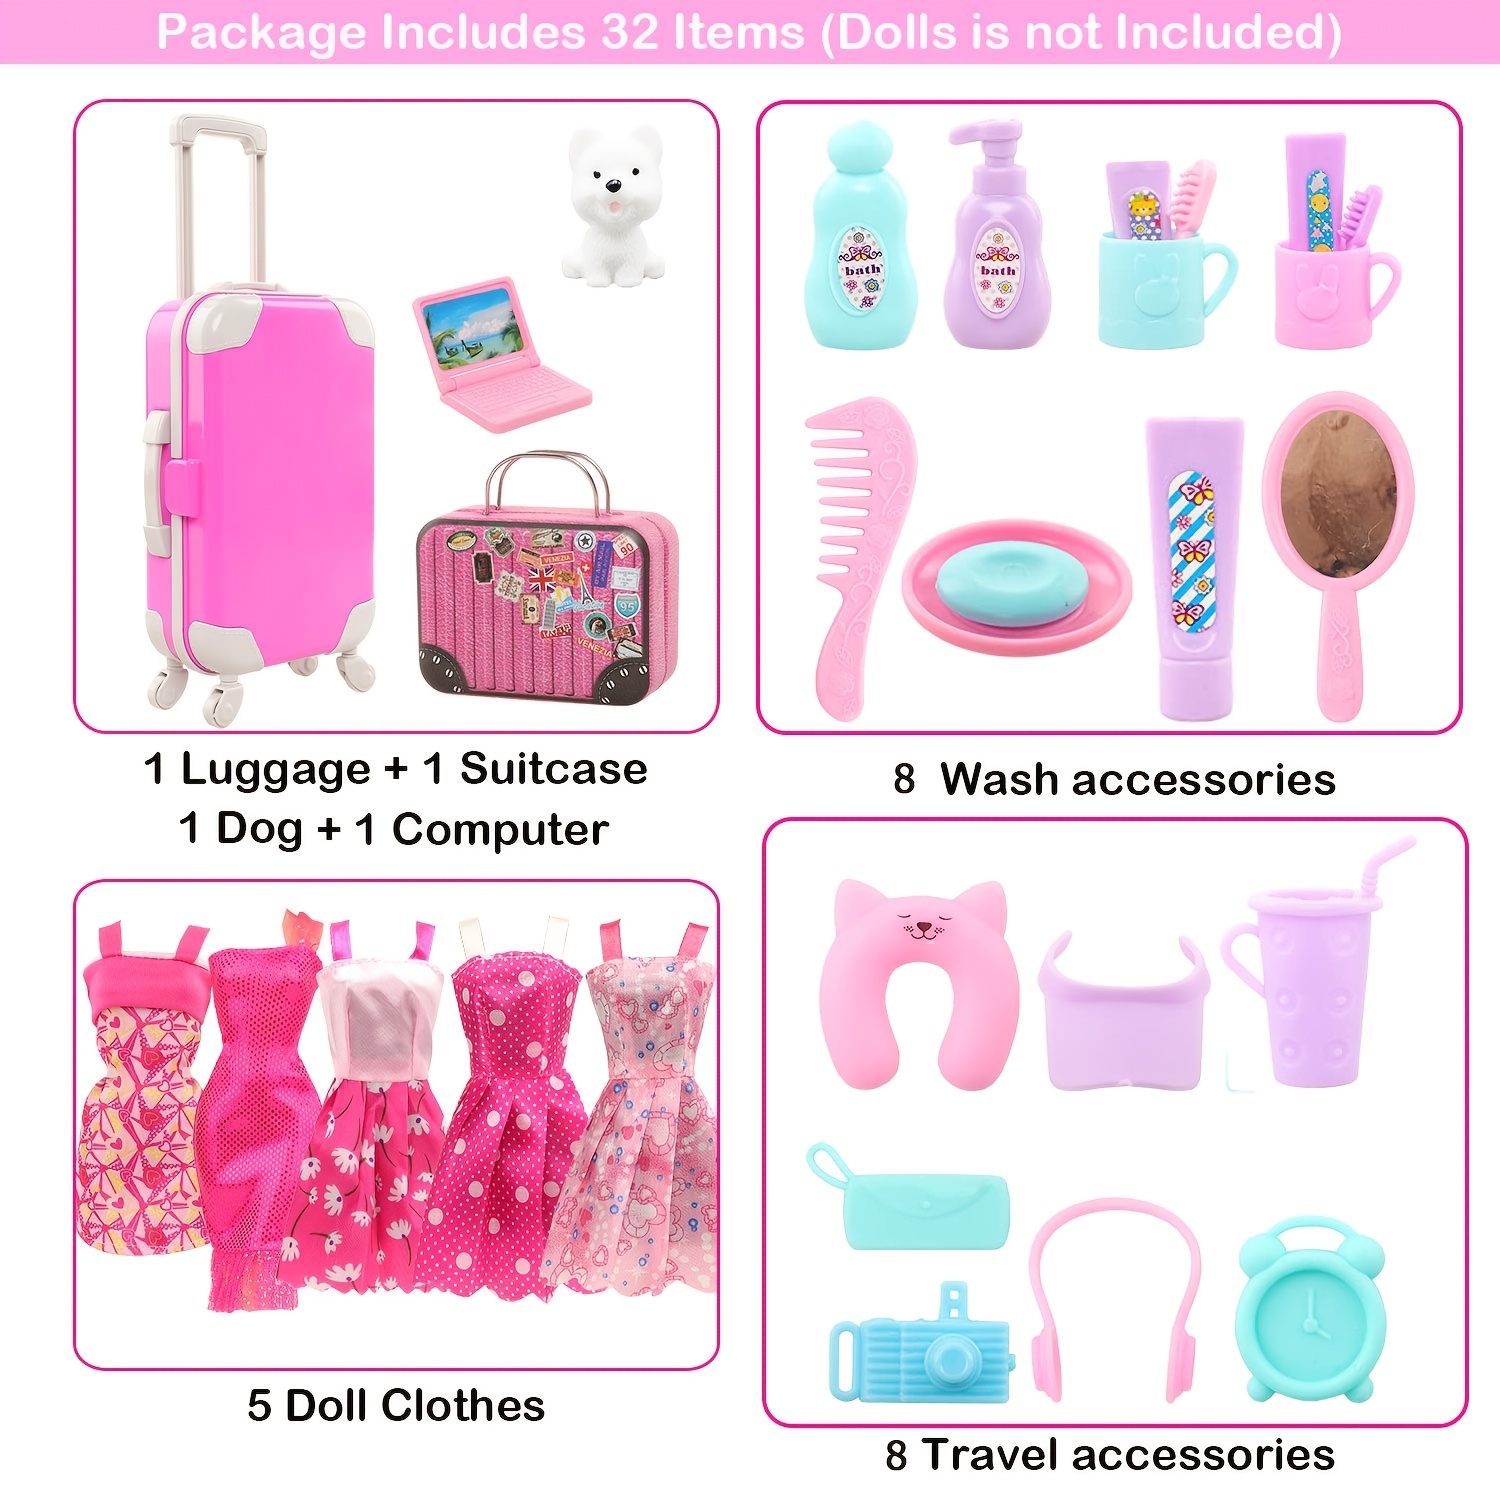 70 Pcs Doll Clothes & Accessories for 11.5 Inch Girl Doll - Includes  Dresses, Shoes, and Other Accessories